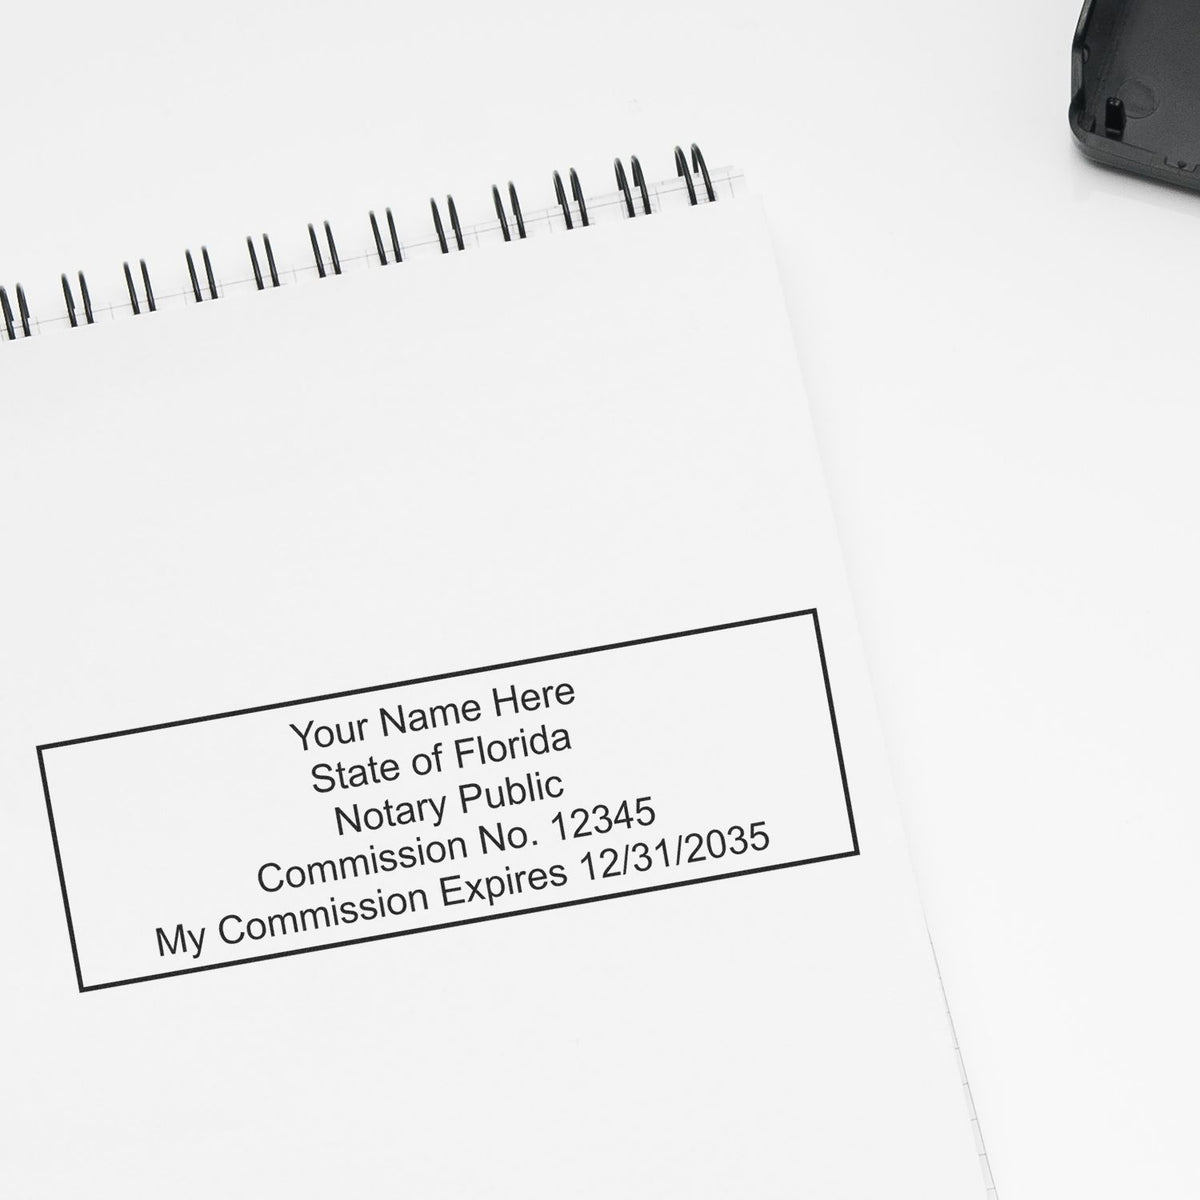 The Slim Pre-Inked Rectangular Notary Stamp for Florida stamp impression comes to life with a crisp, detailed photo on paper - showcasing true professional quality.